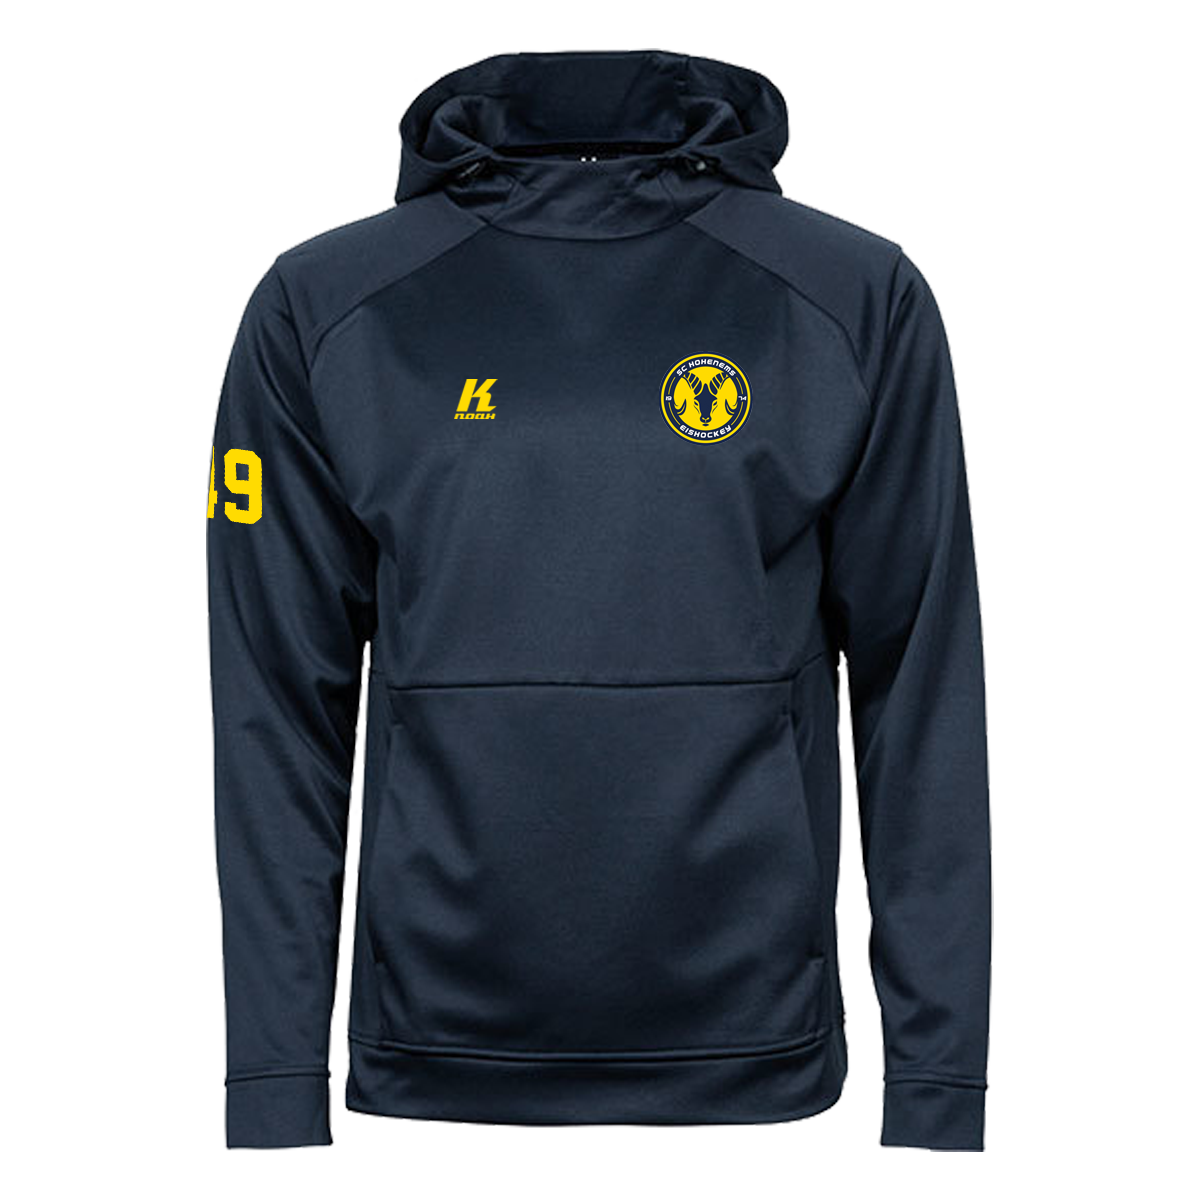 HSC Performance Hoodie TJ5600 Primary with Playernumber/Initials